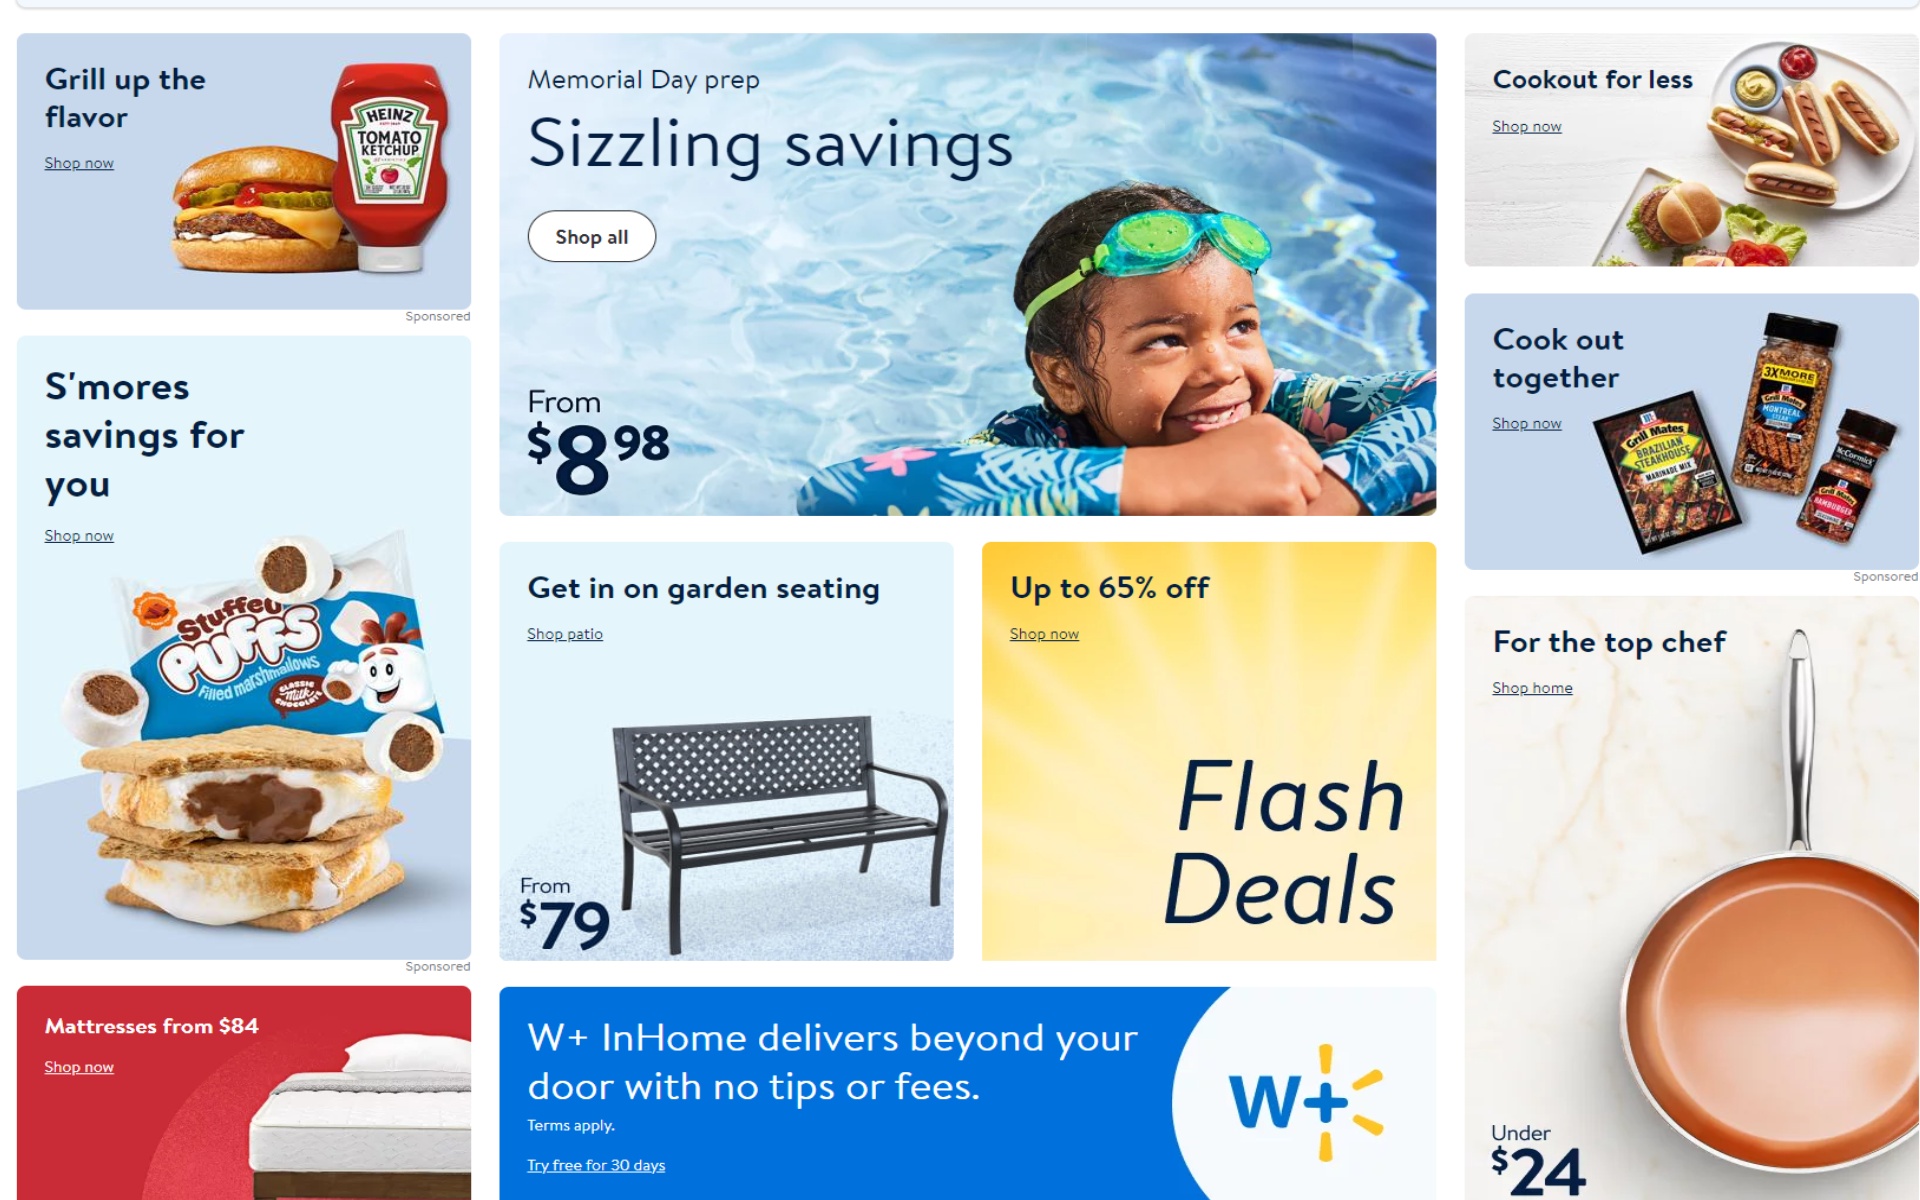 Walmart offers Memorial Day deals for jewelry, electronics, beauty, home and more